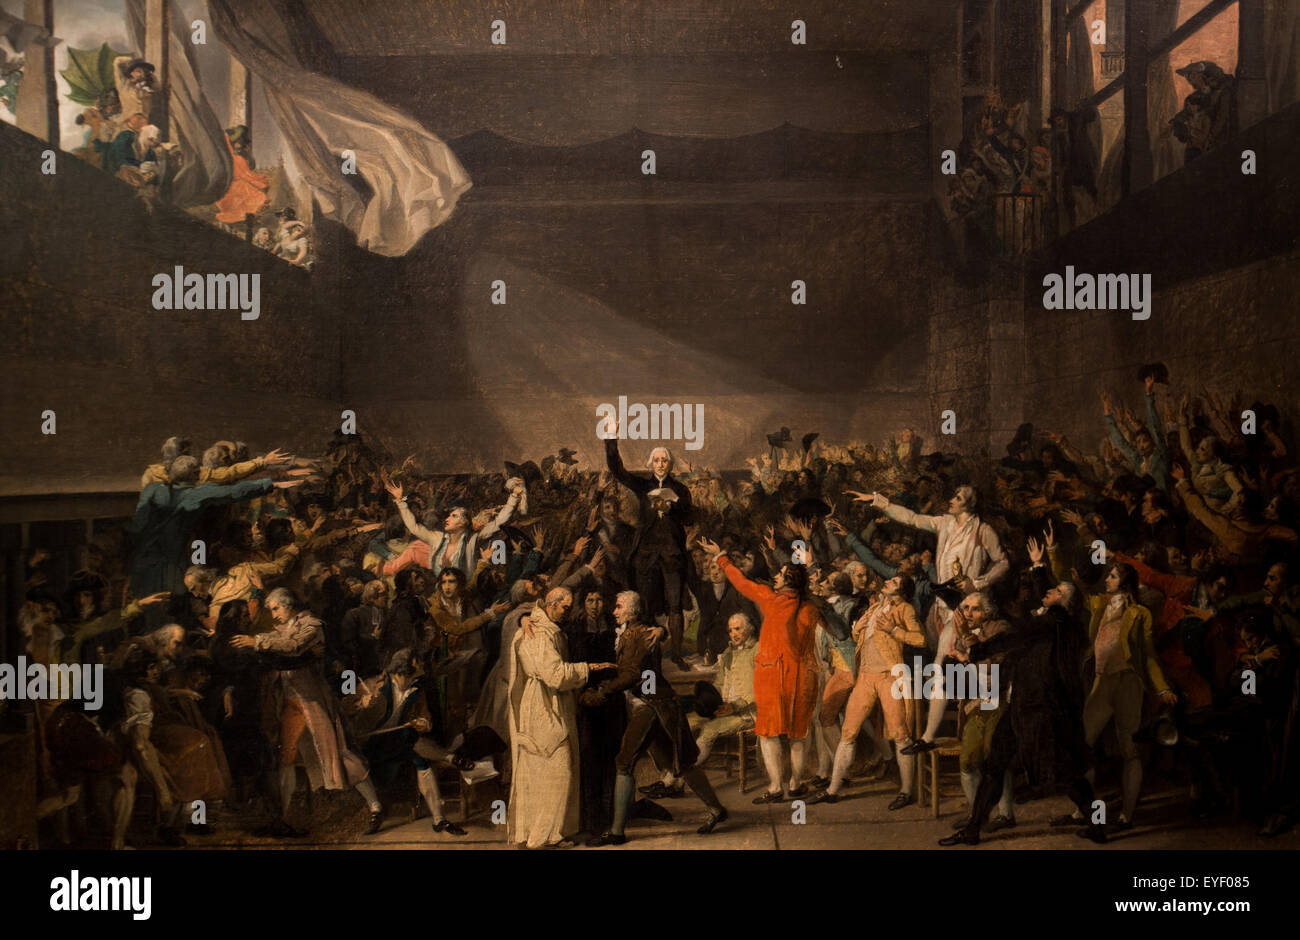 The Tennis Court Oath, June 20th 1789 The deputy of middle class, reunited as an national assembly around Bally, in the tennis court oath in Versailles. David was charged by the Constitution to commemorate the event. HIs big canvas stayed at the preparato Stock Photo